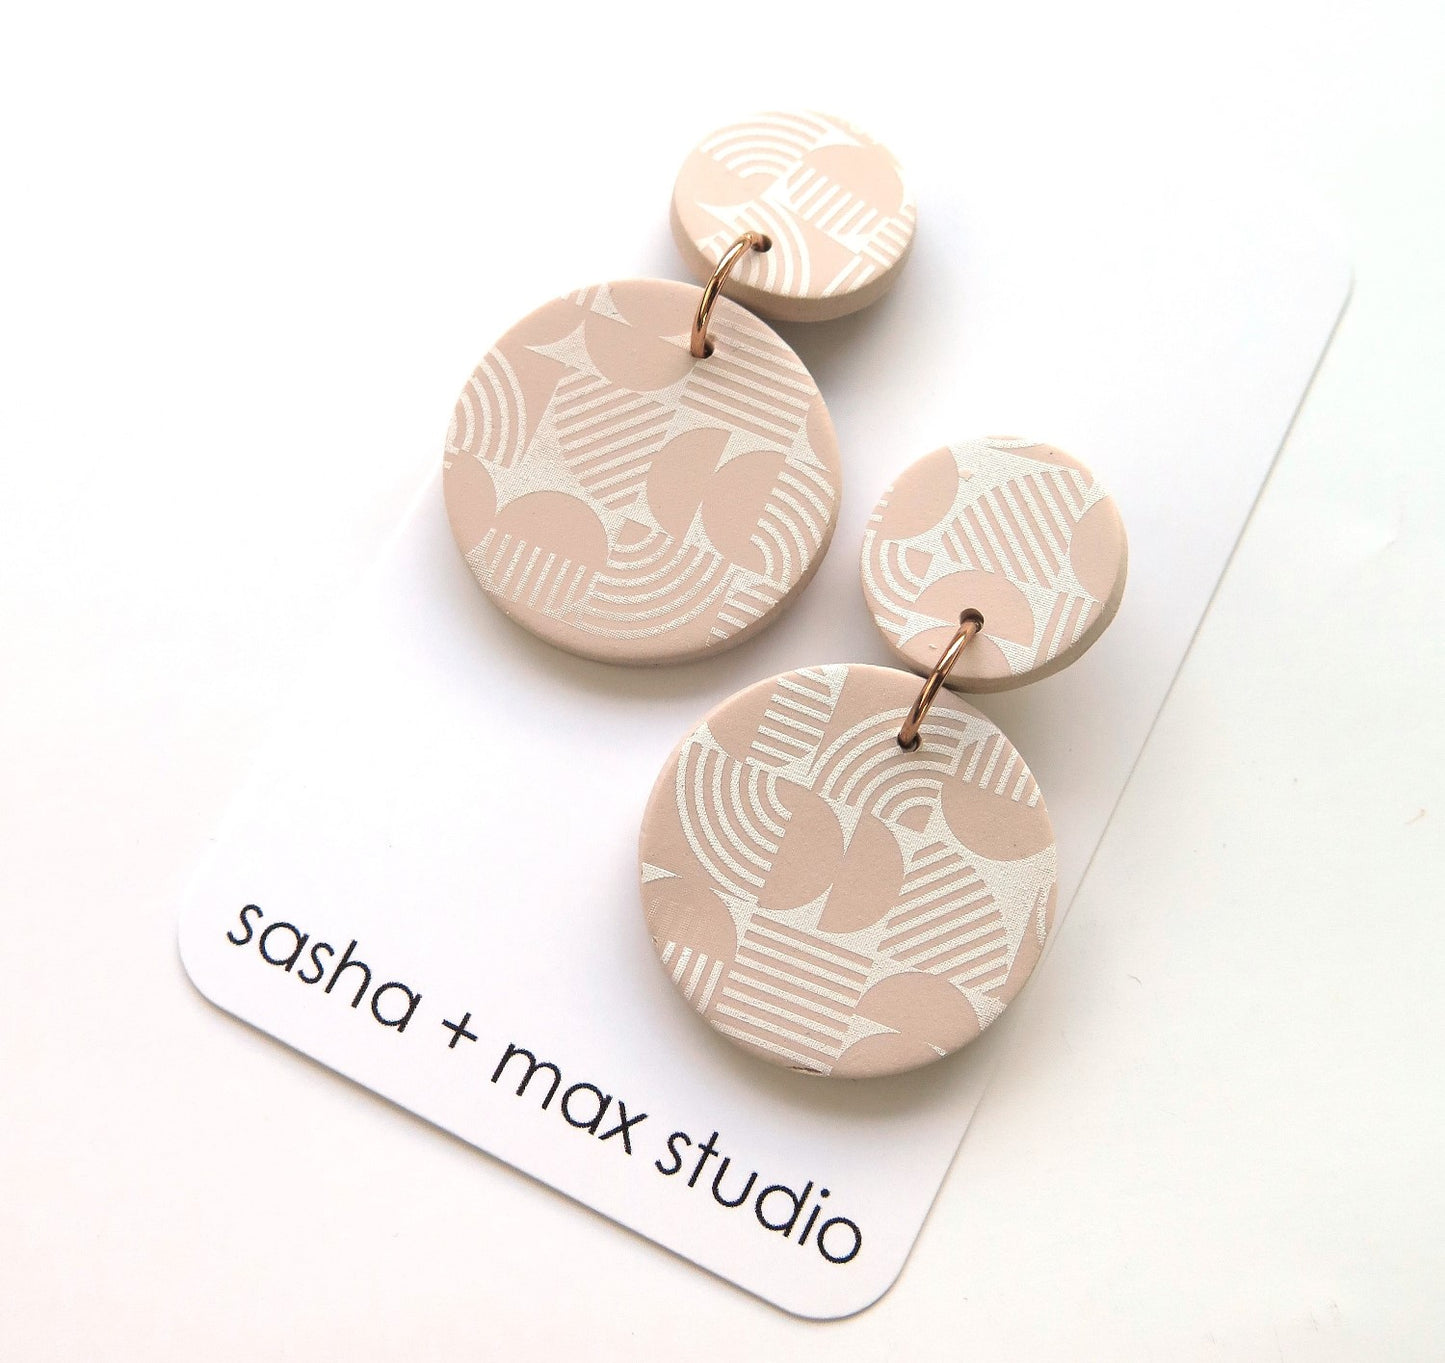 Retro Round ecru and white polymer clay earrings